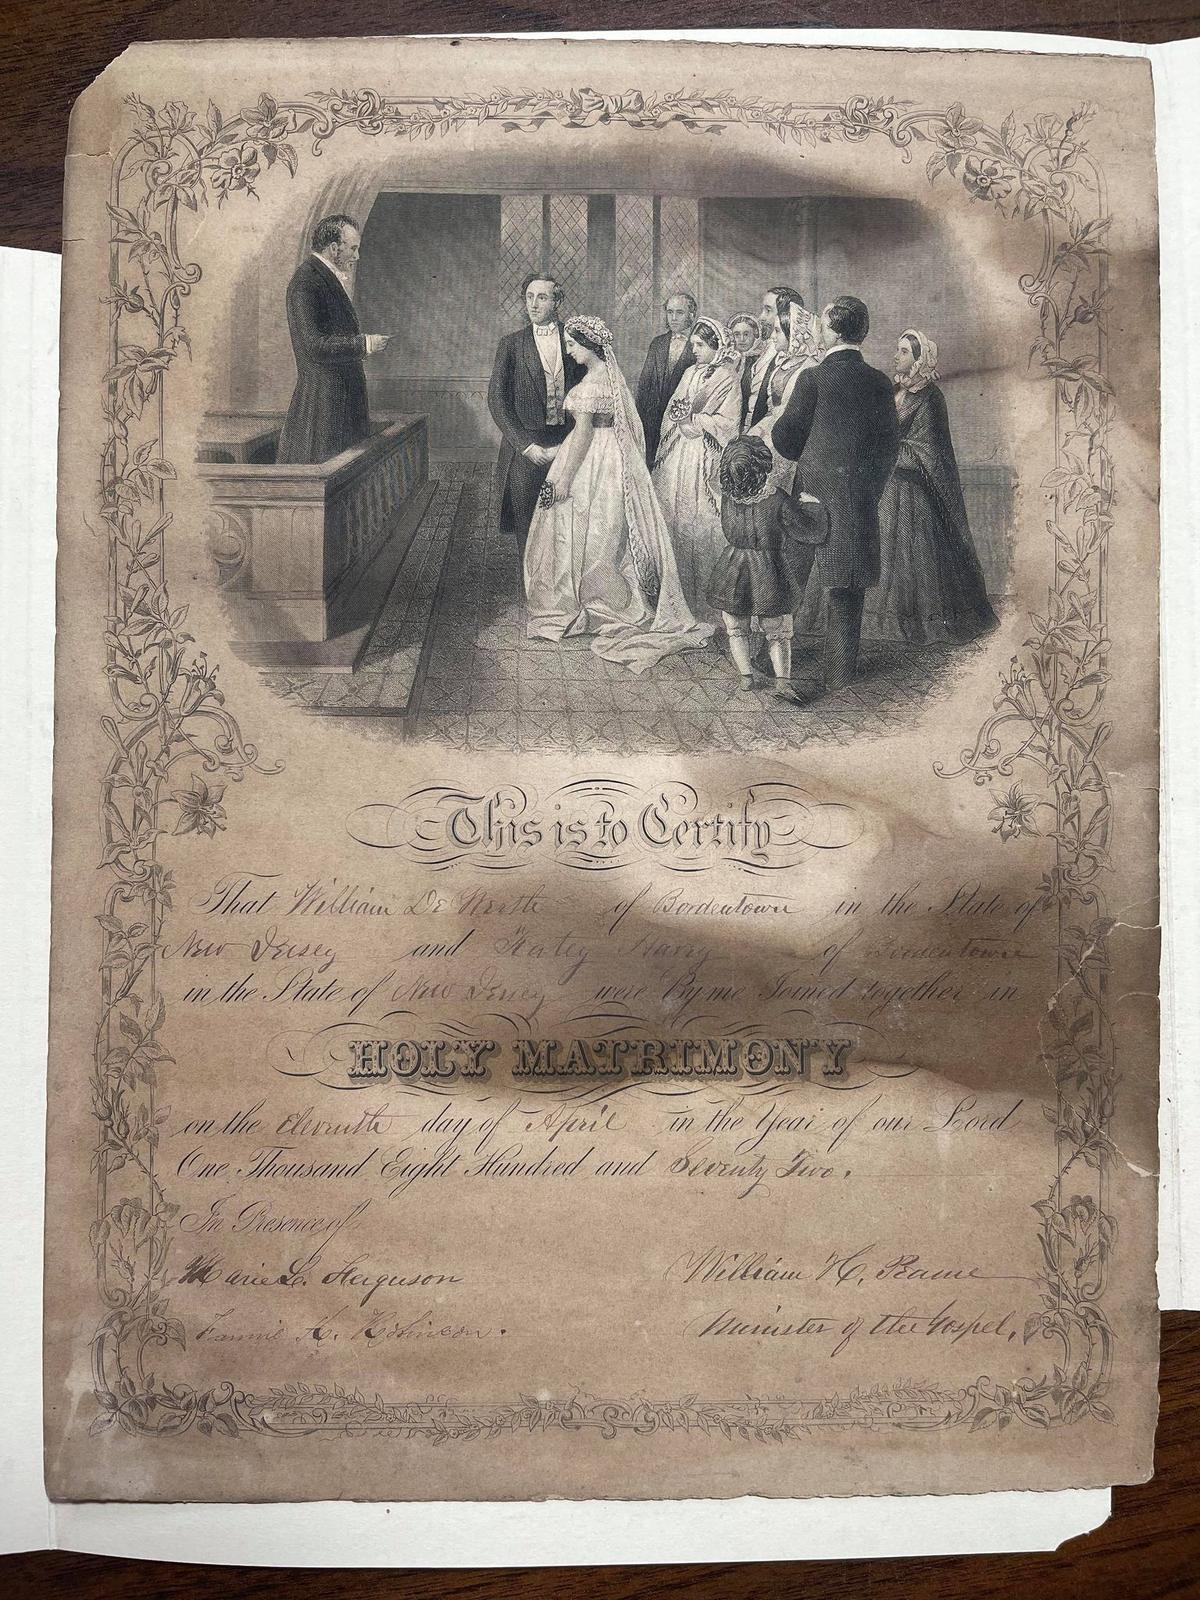 The marriage certificate that was discovered at the back of the painting. (Courtesy of <a href="https://www.facebook.com/KarmenCaroline">Karmen Smith</a>)